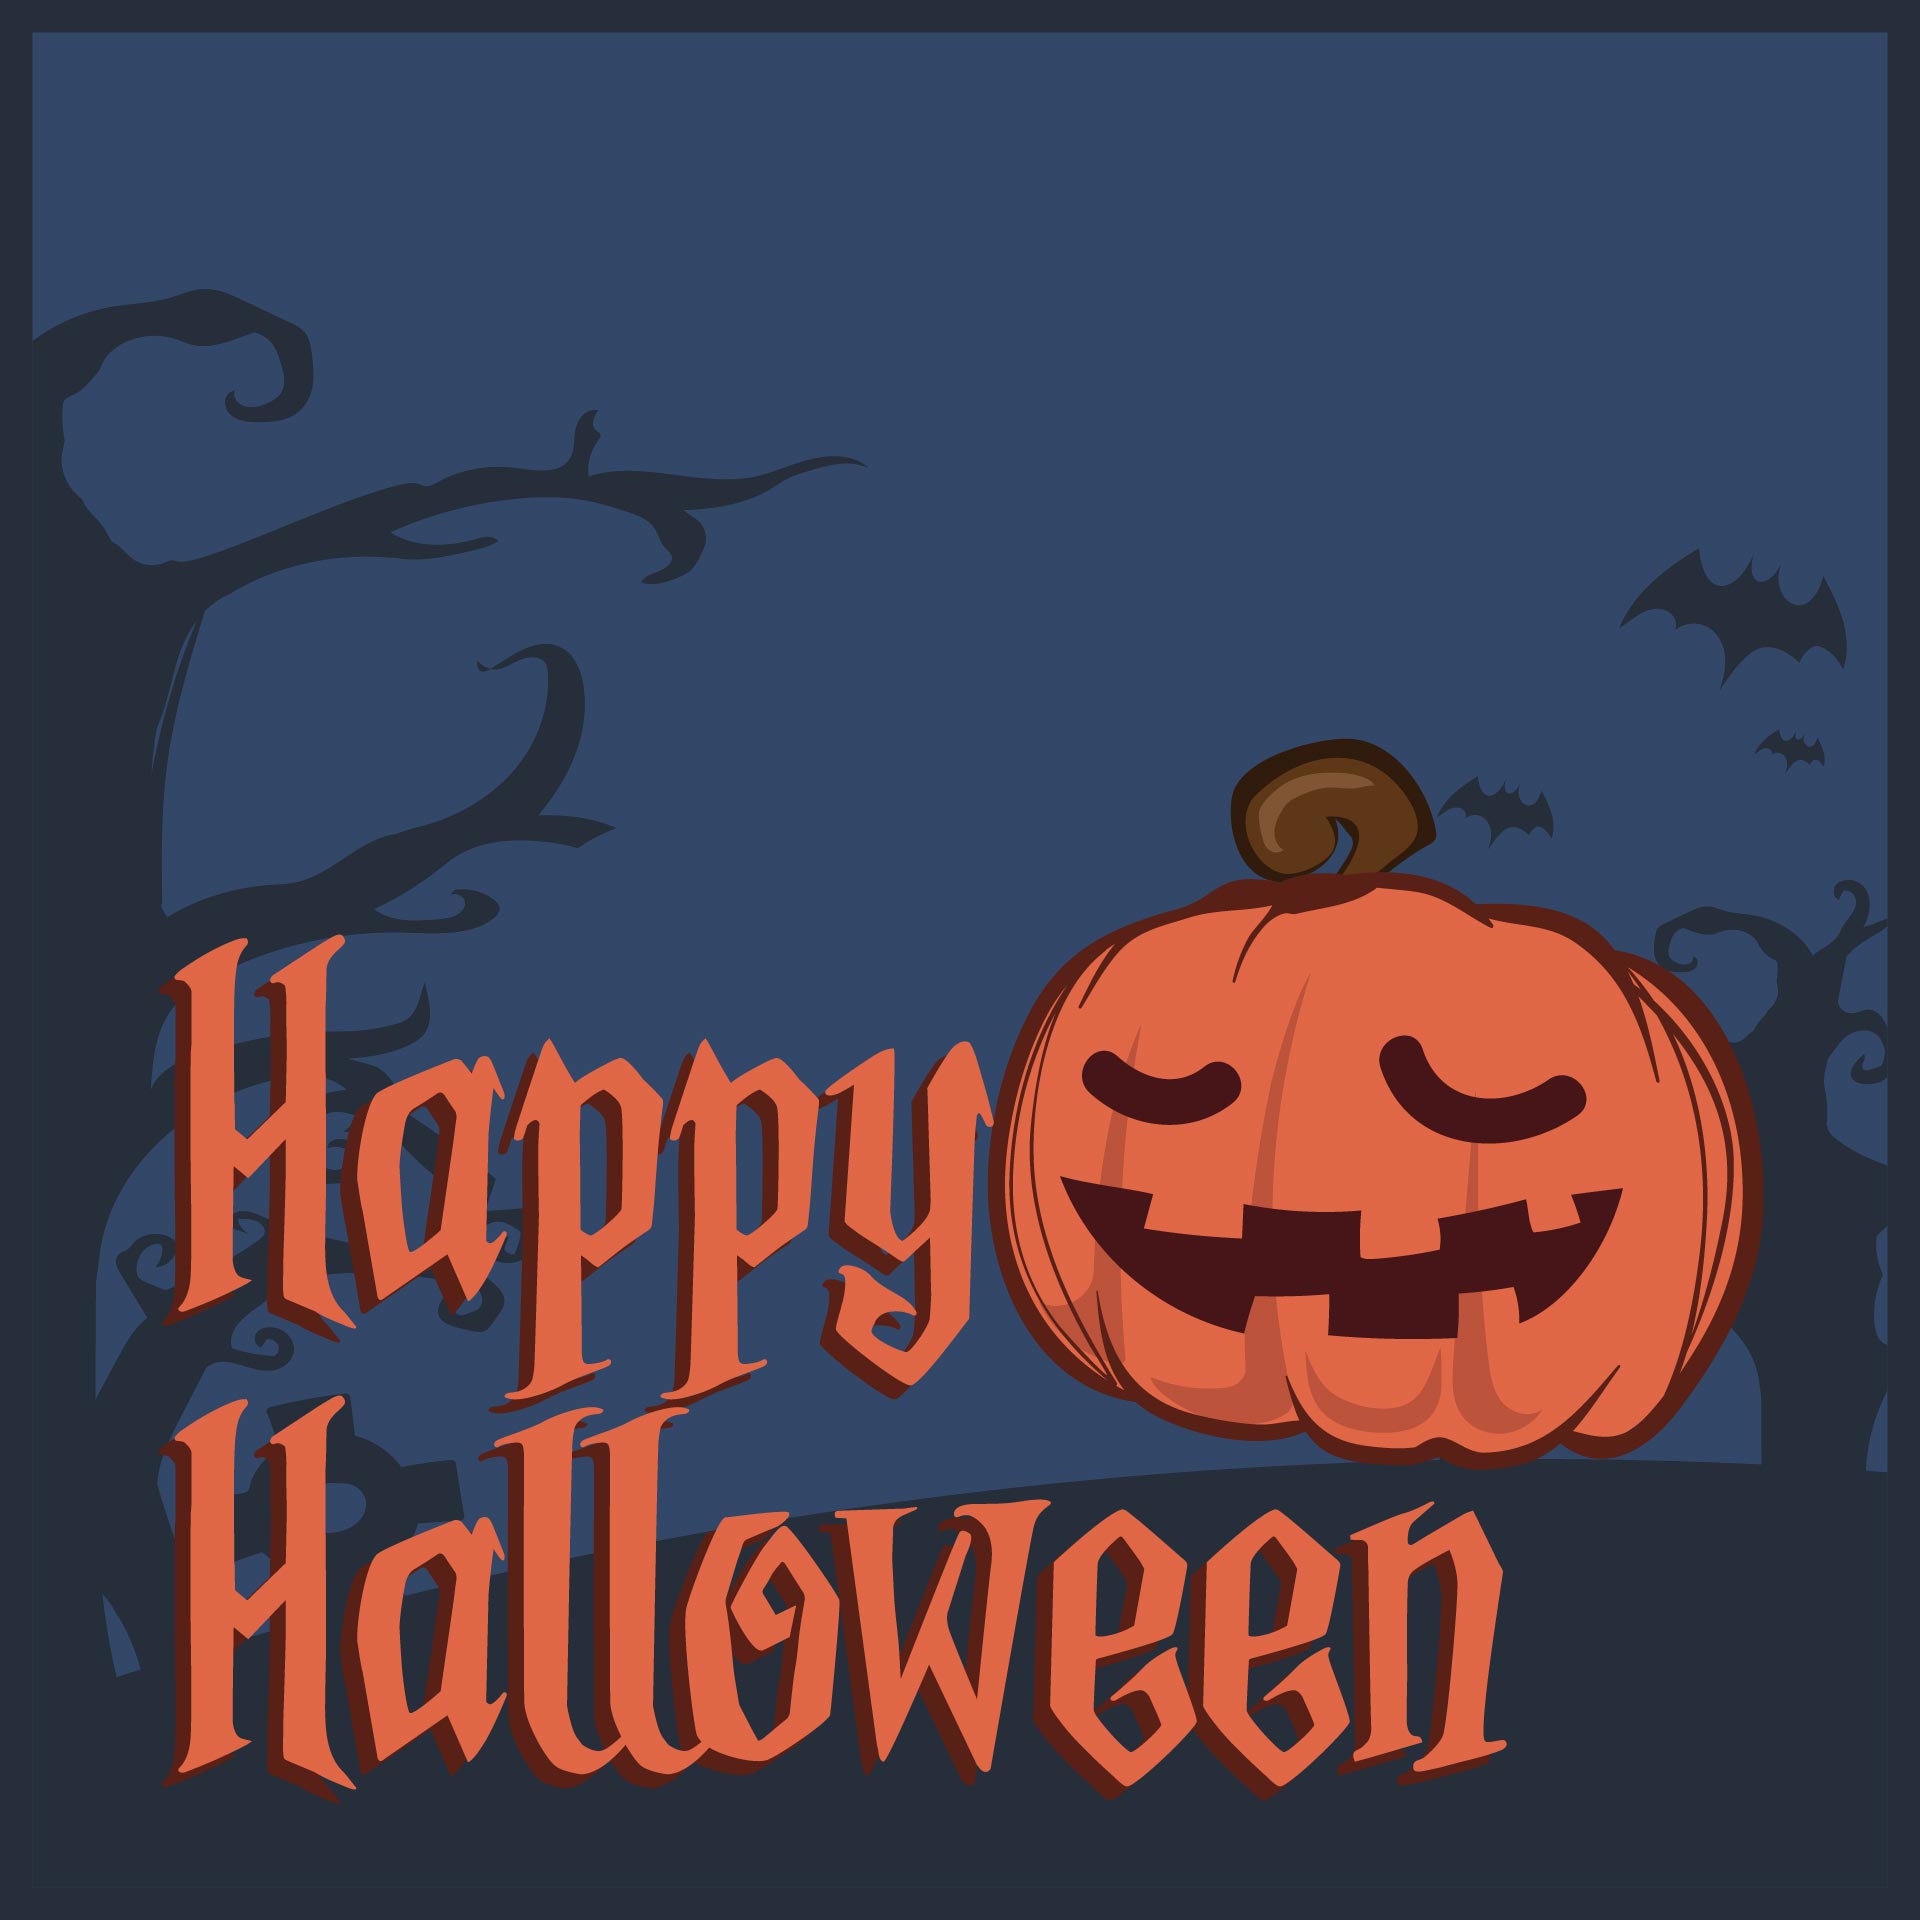 Printable Halloween Greeting Card Messages